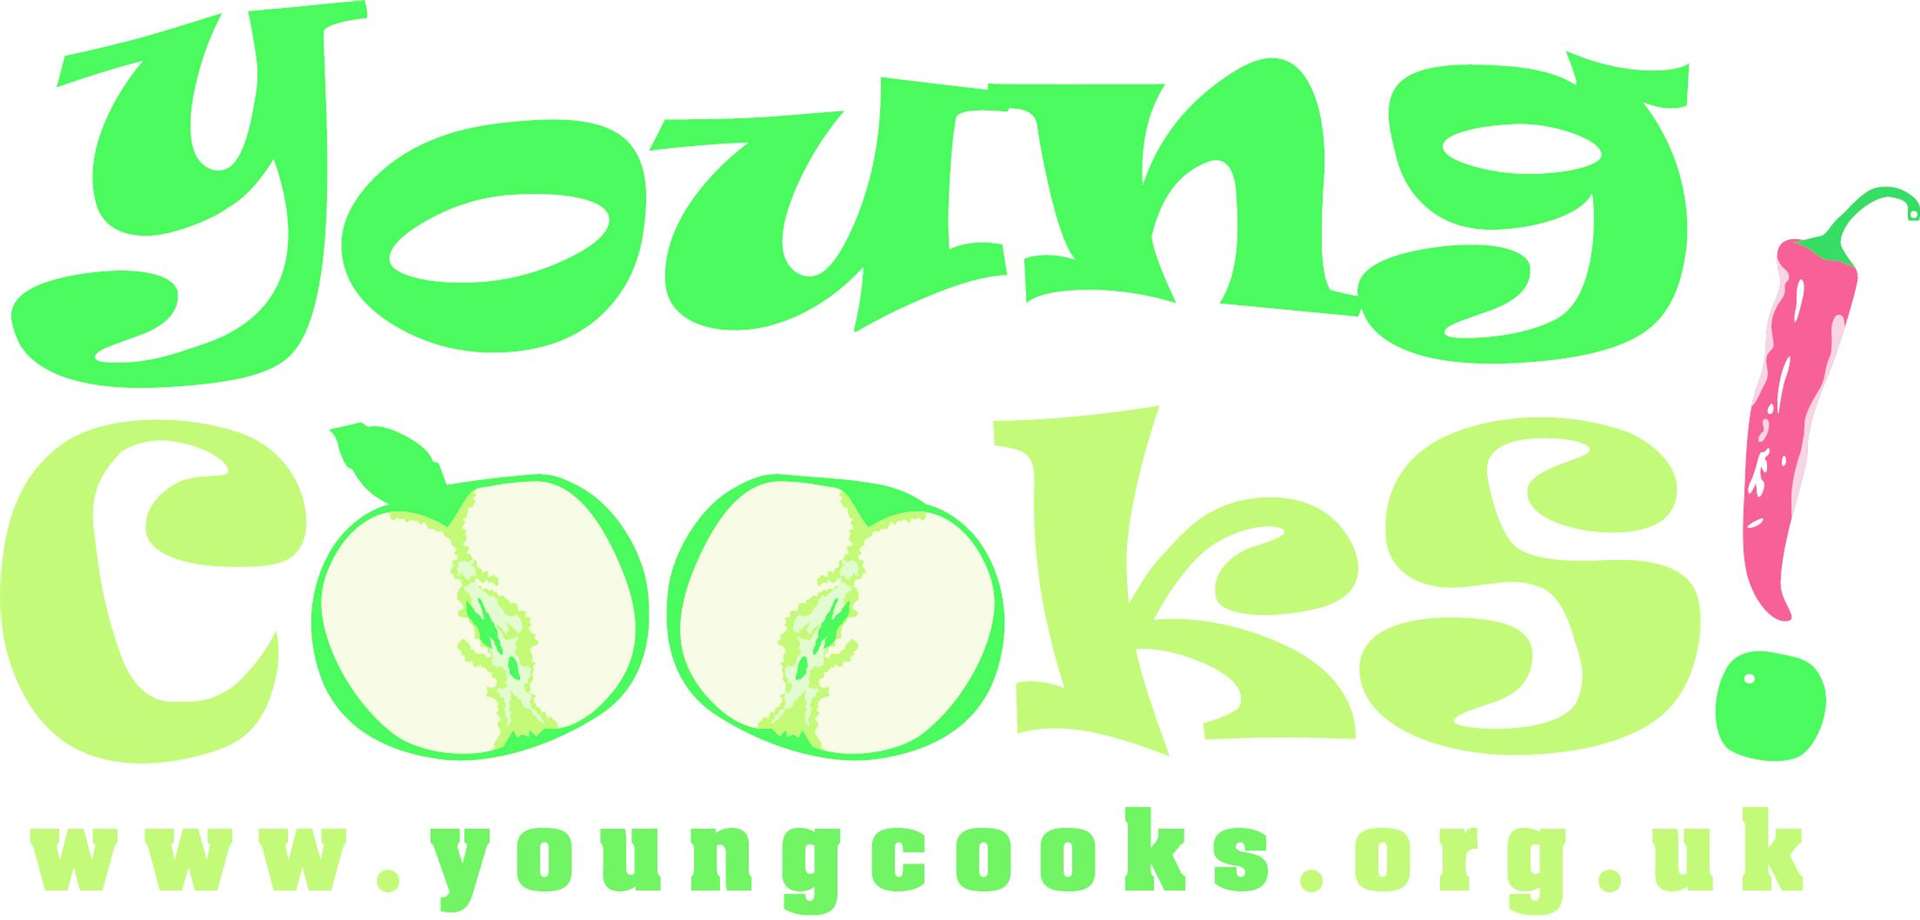 The Young Cooks logo (7812376)